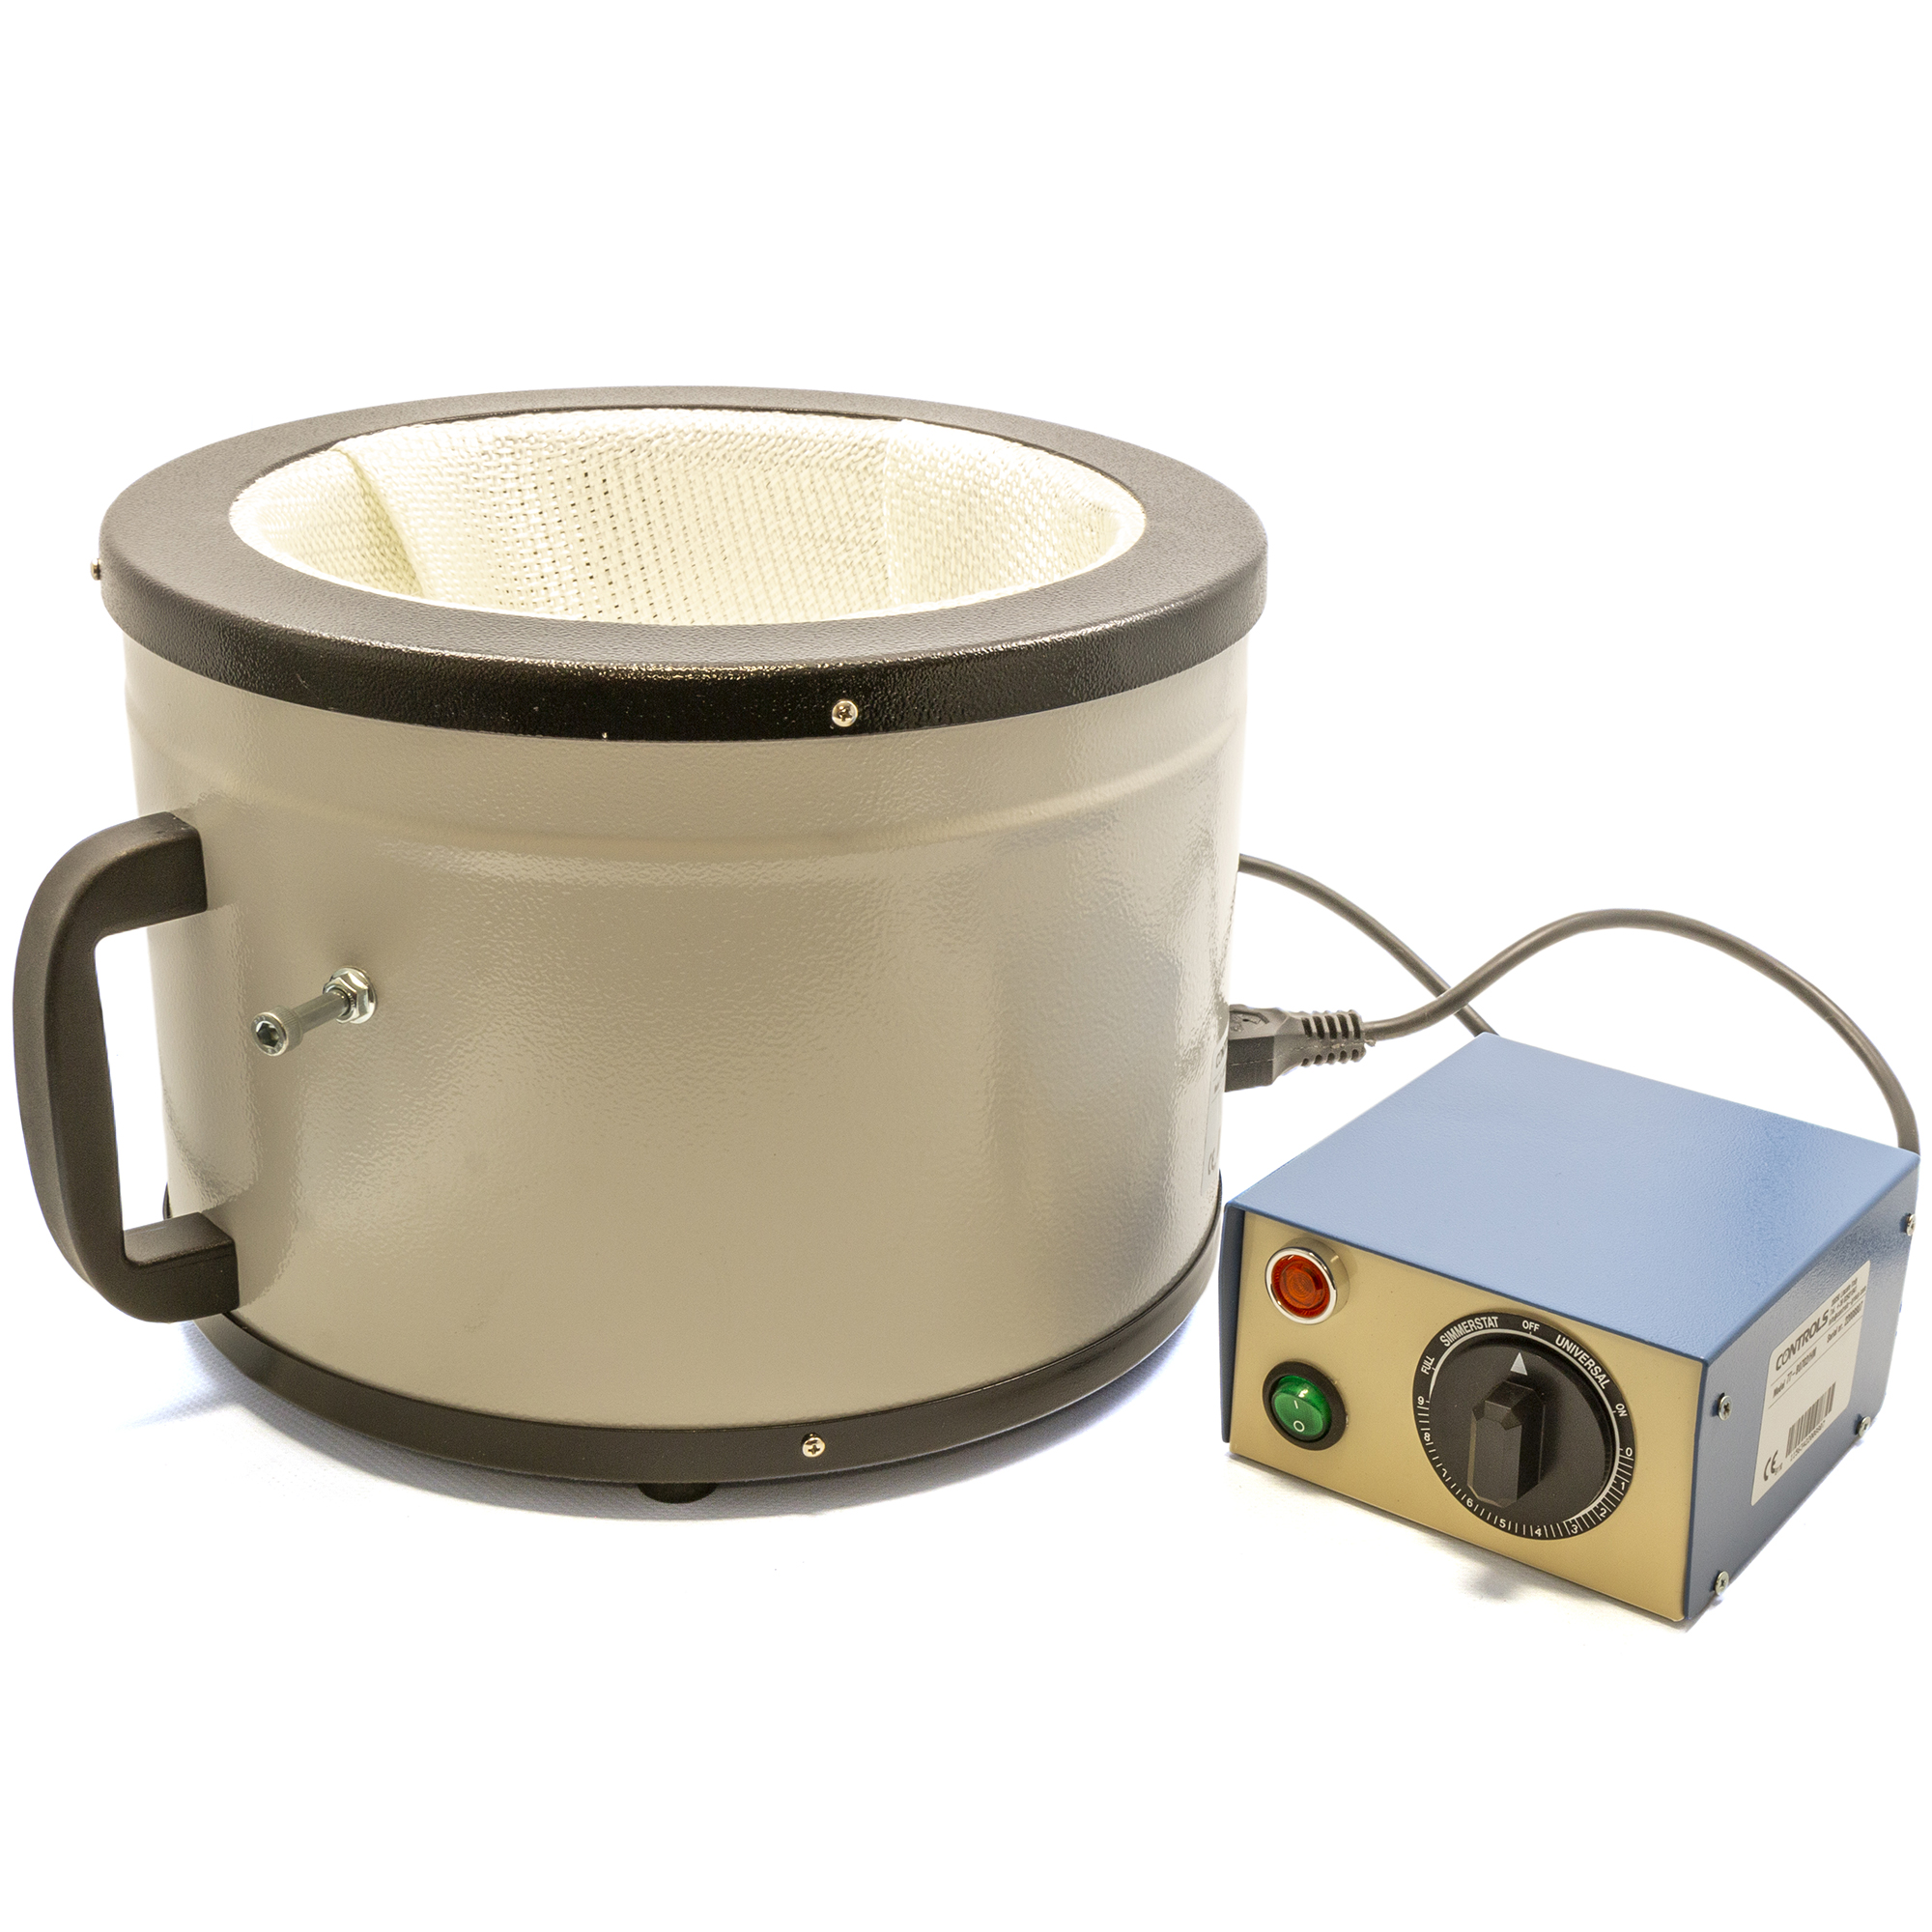 CONT 16-B0075/HM Heating mantle for mixer 20 liters capacity 16-B0075/B